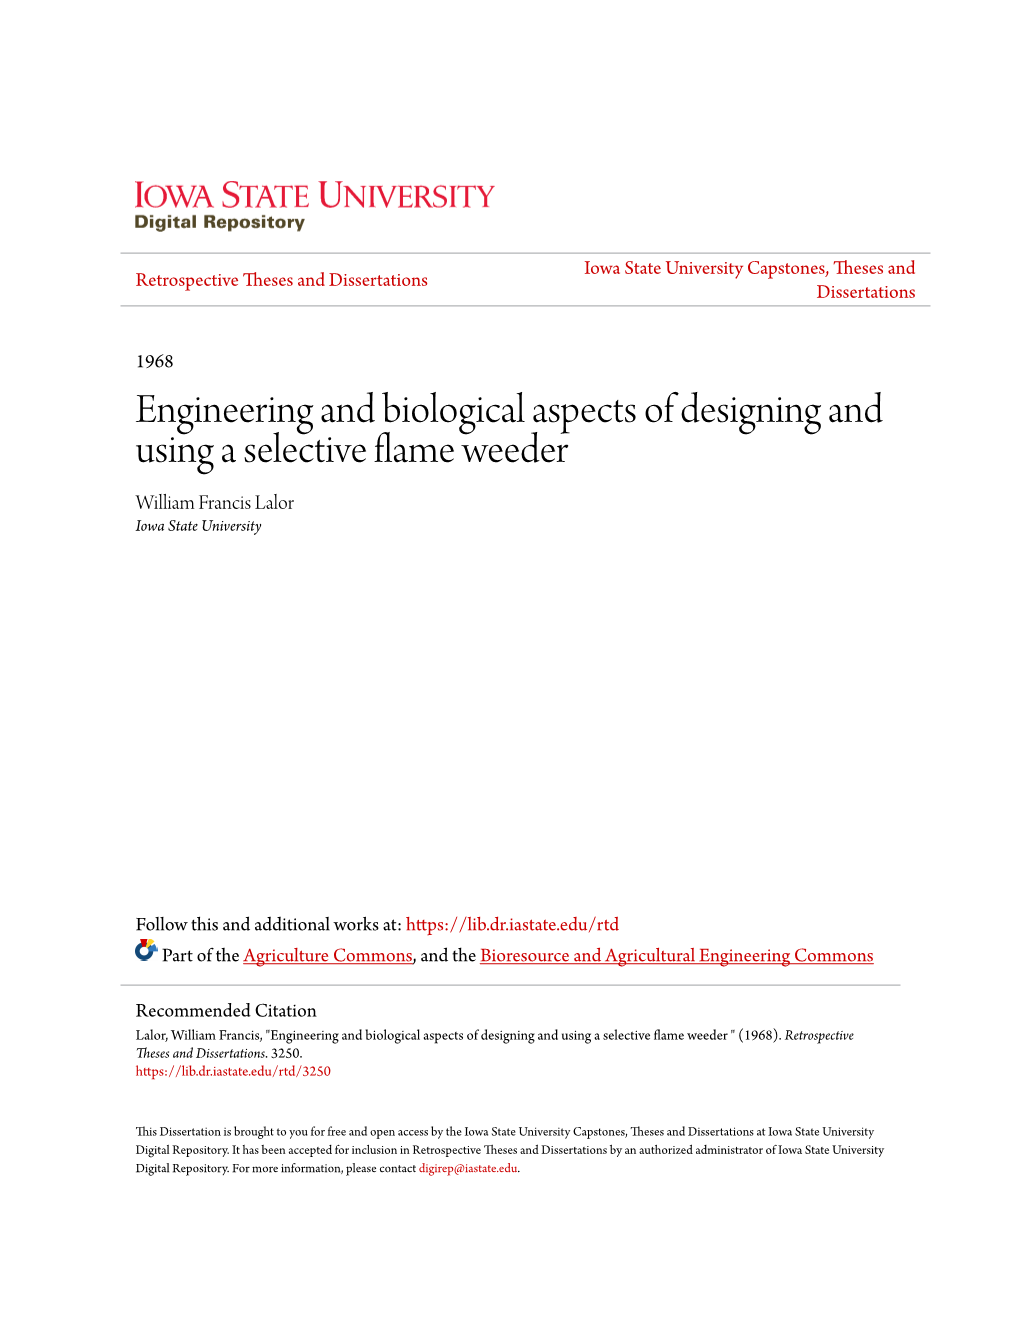 Engineering and Biological Aspects of Designing and Using a Selective Flame Weeder William Francis Lalor Iowa State University